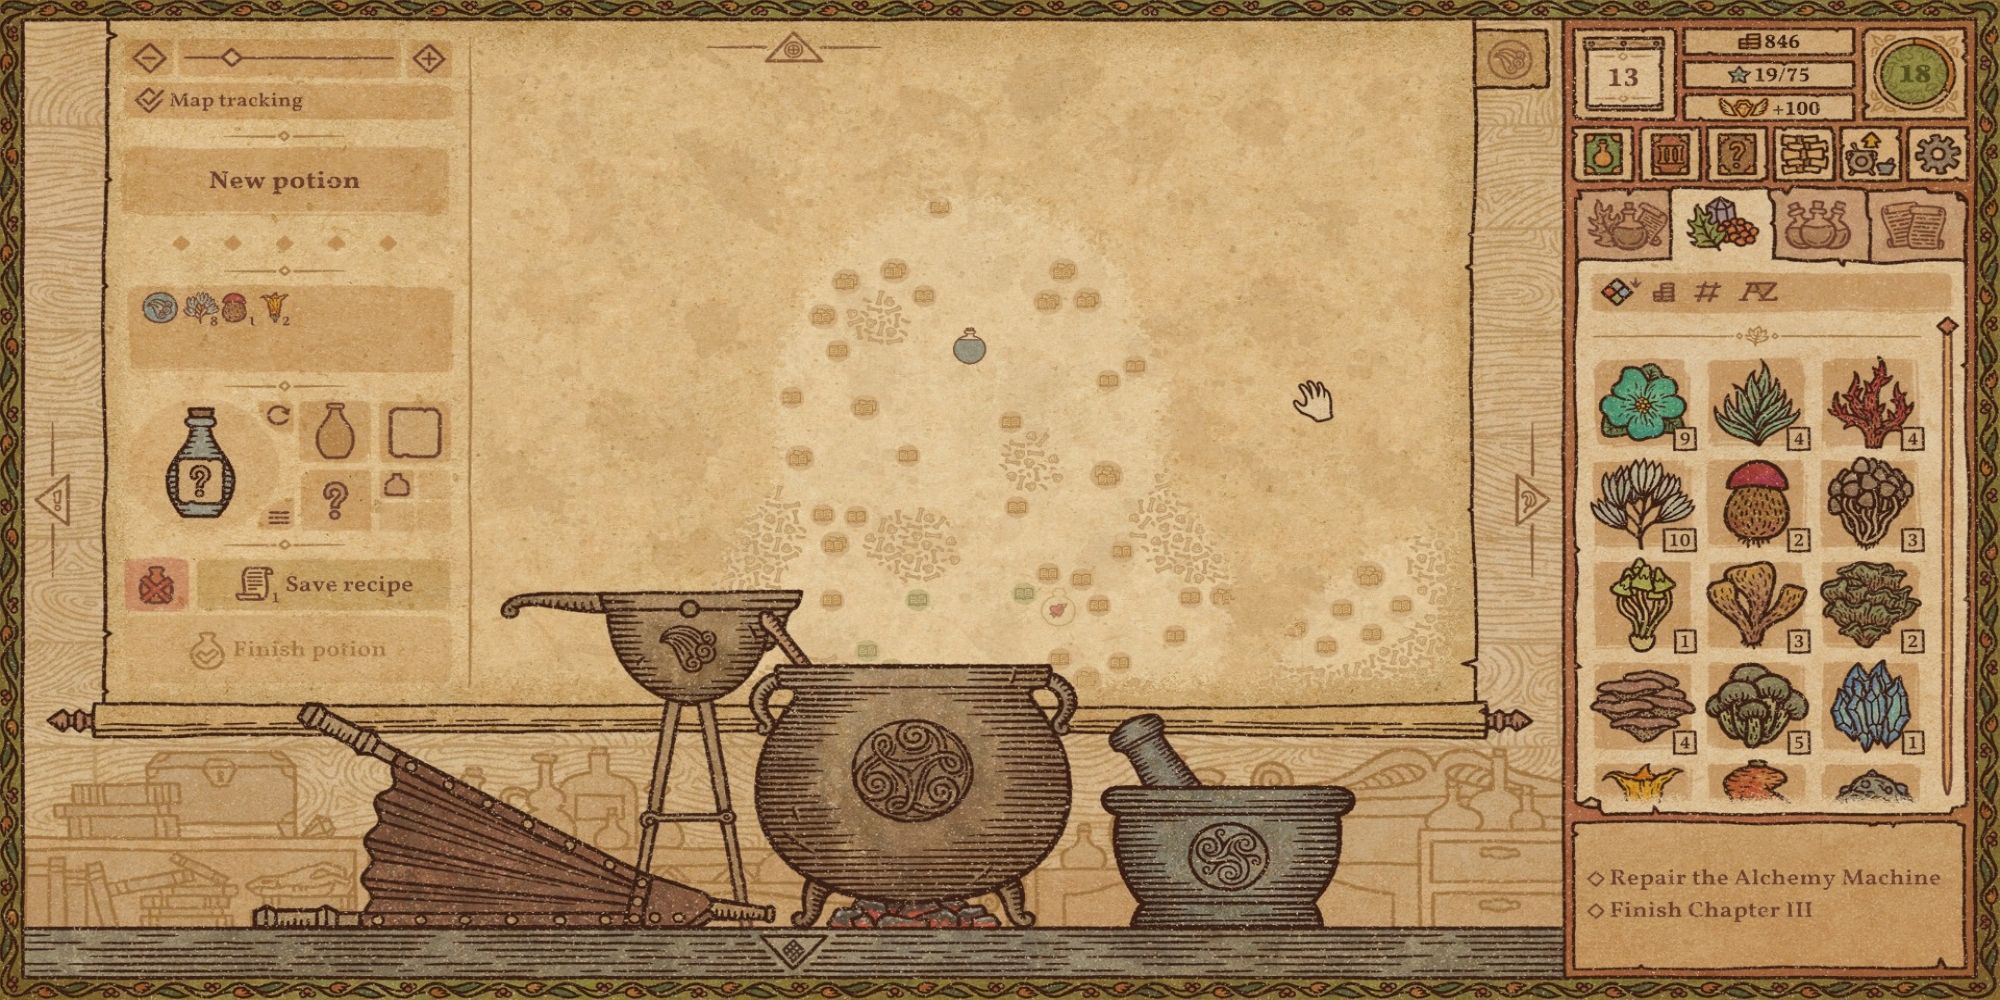 An early-game view of the map in Potion Craft: Alchemist Simulator